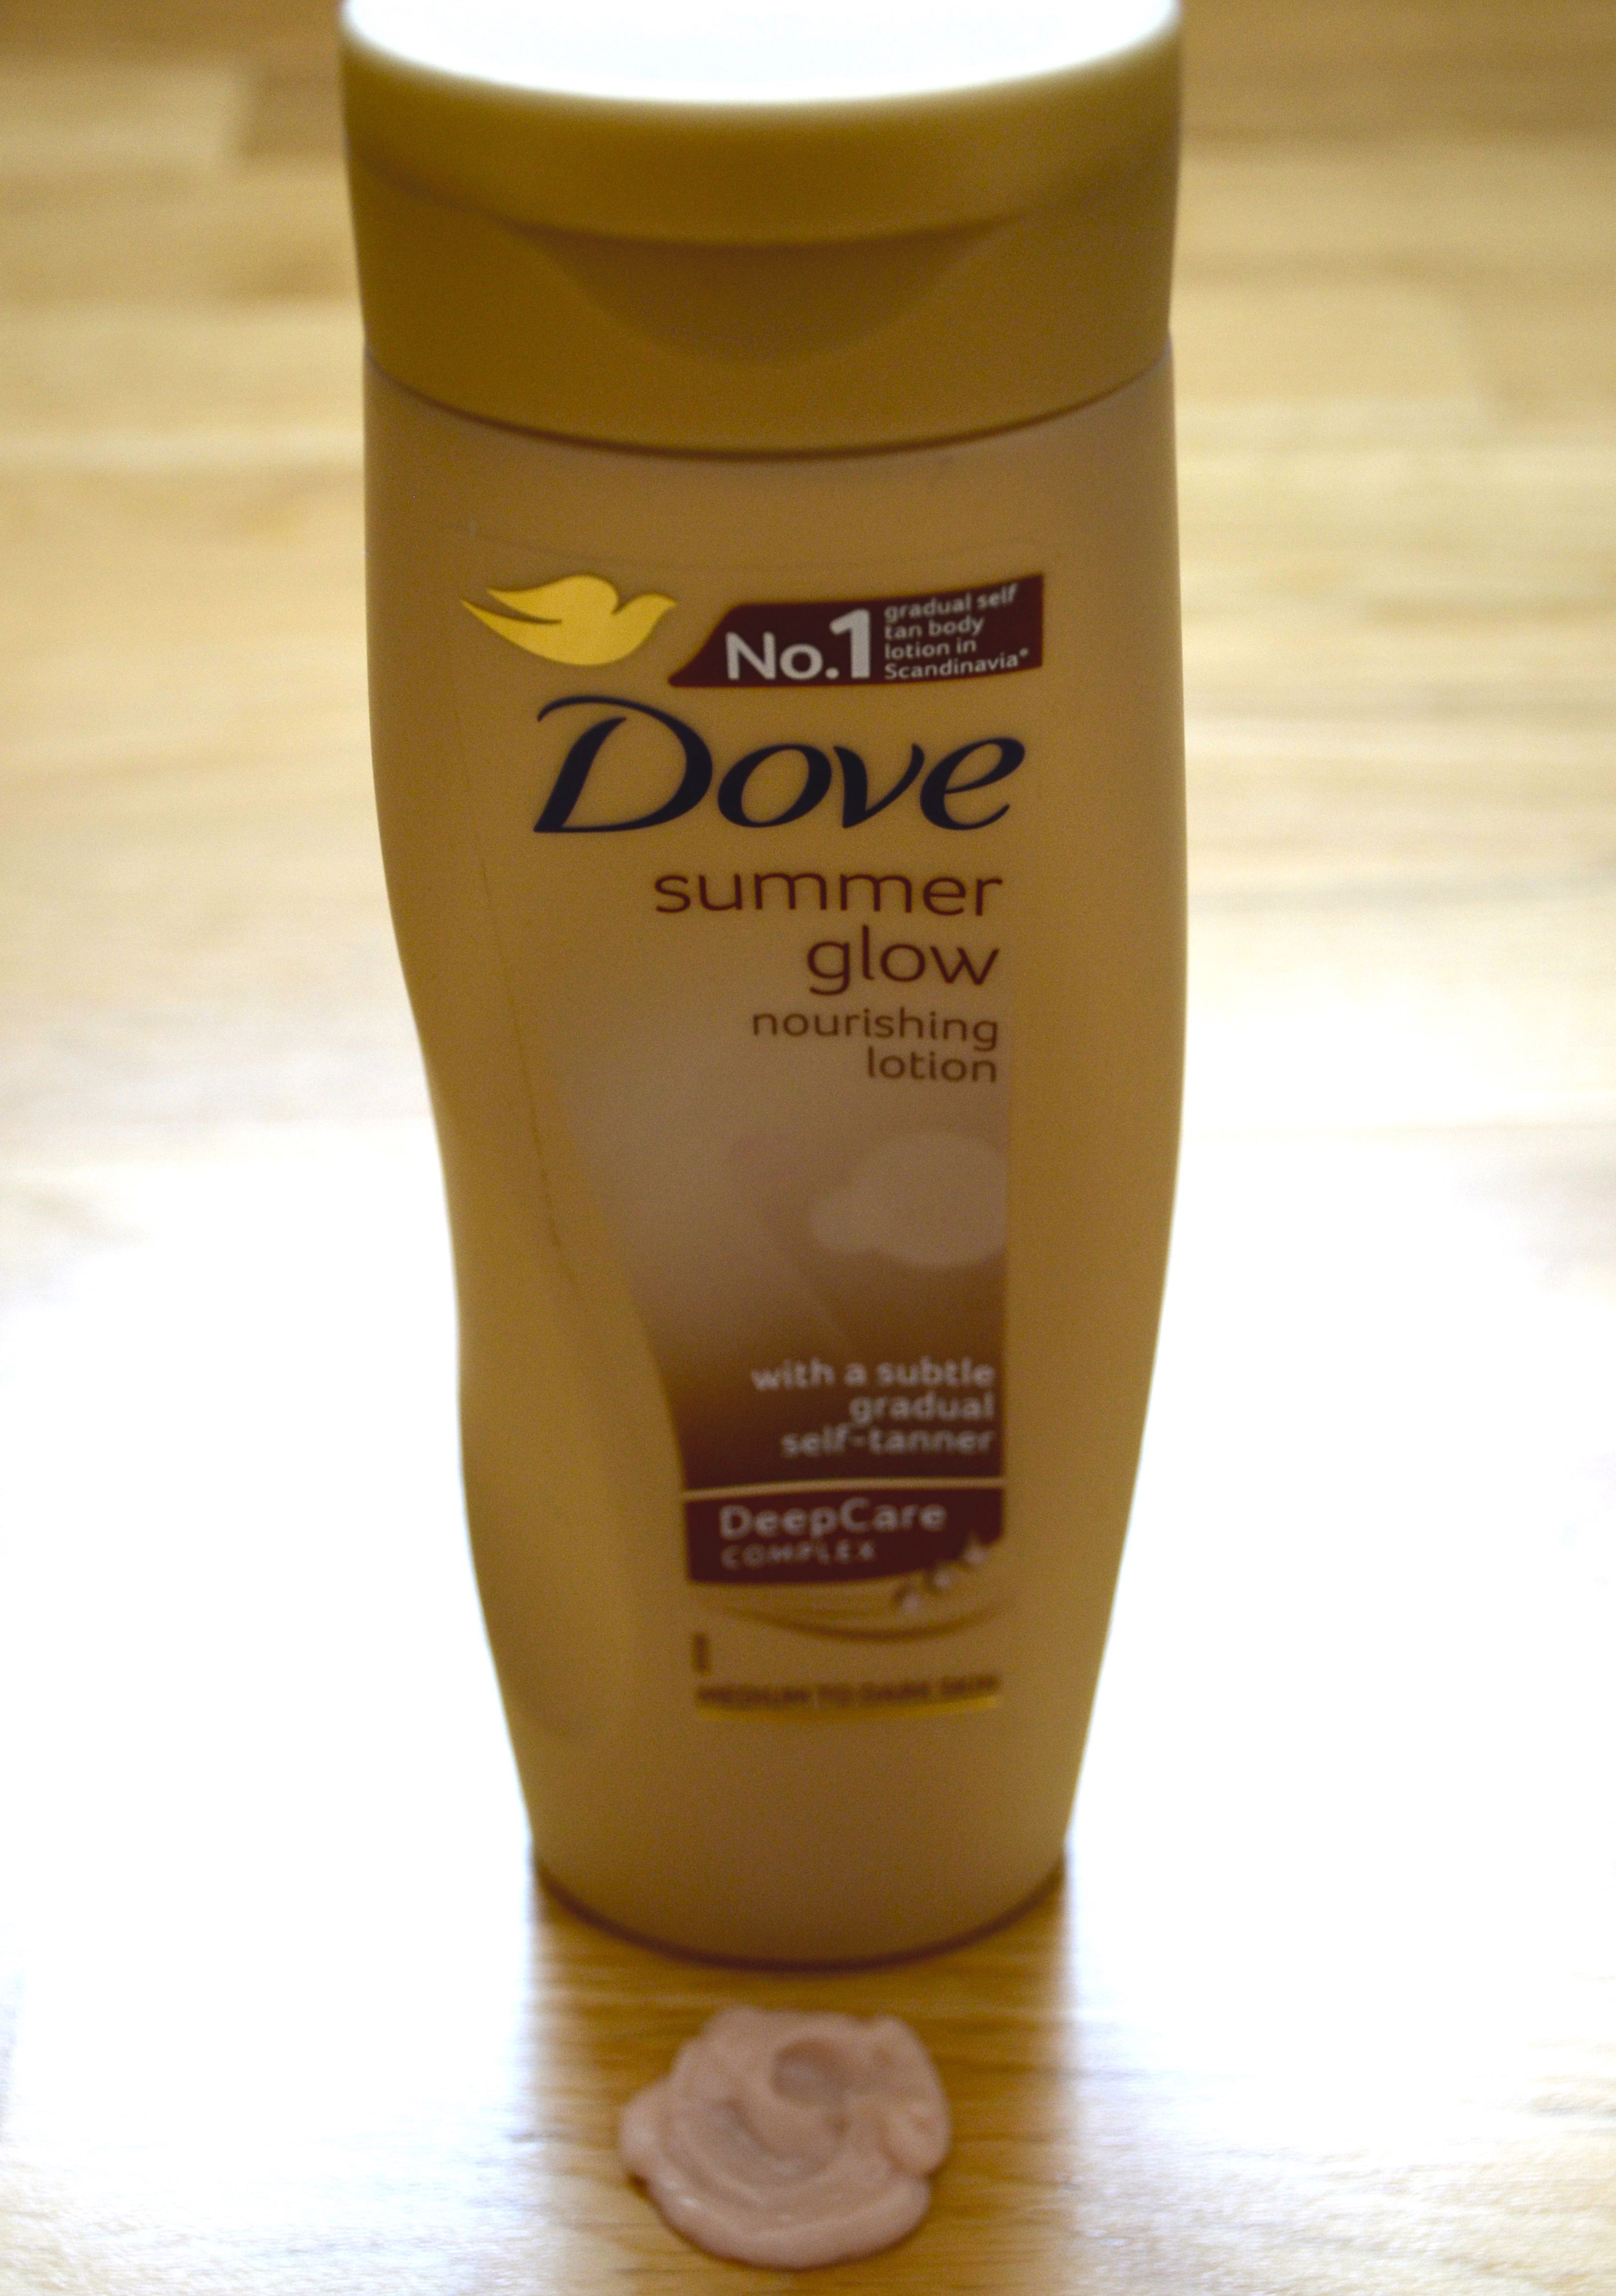 Dove summer glow - Beauty Finds for the summer at www.laughlovekiss.com